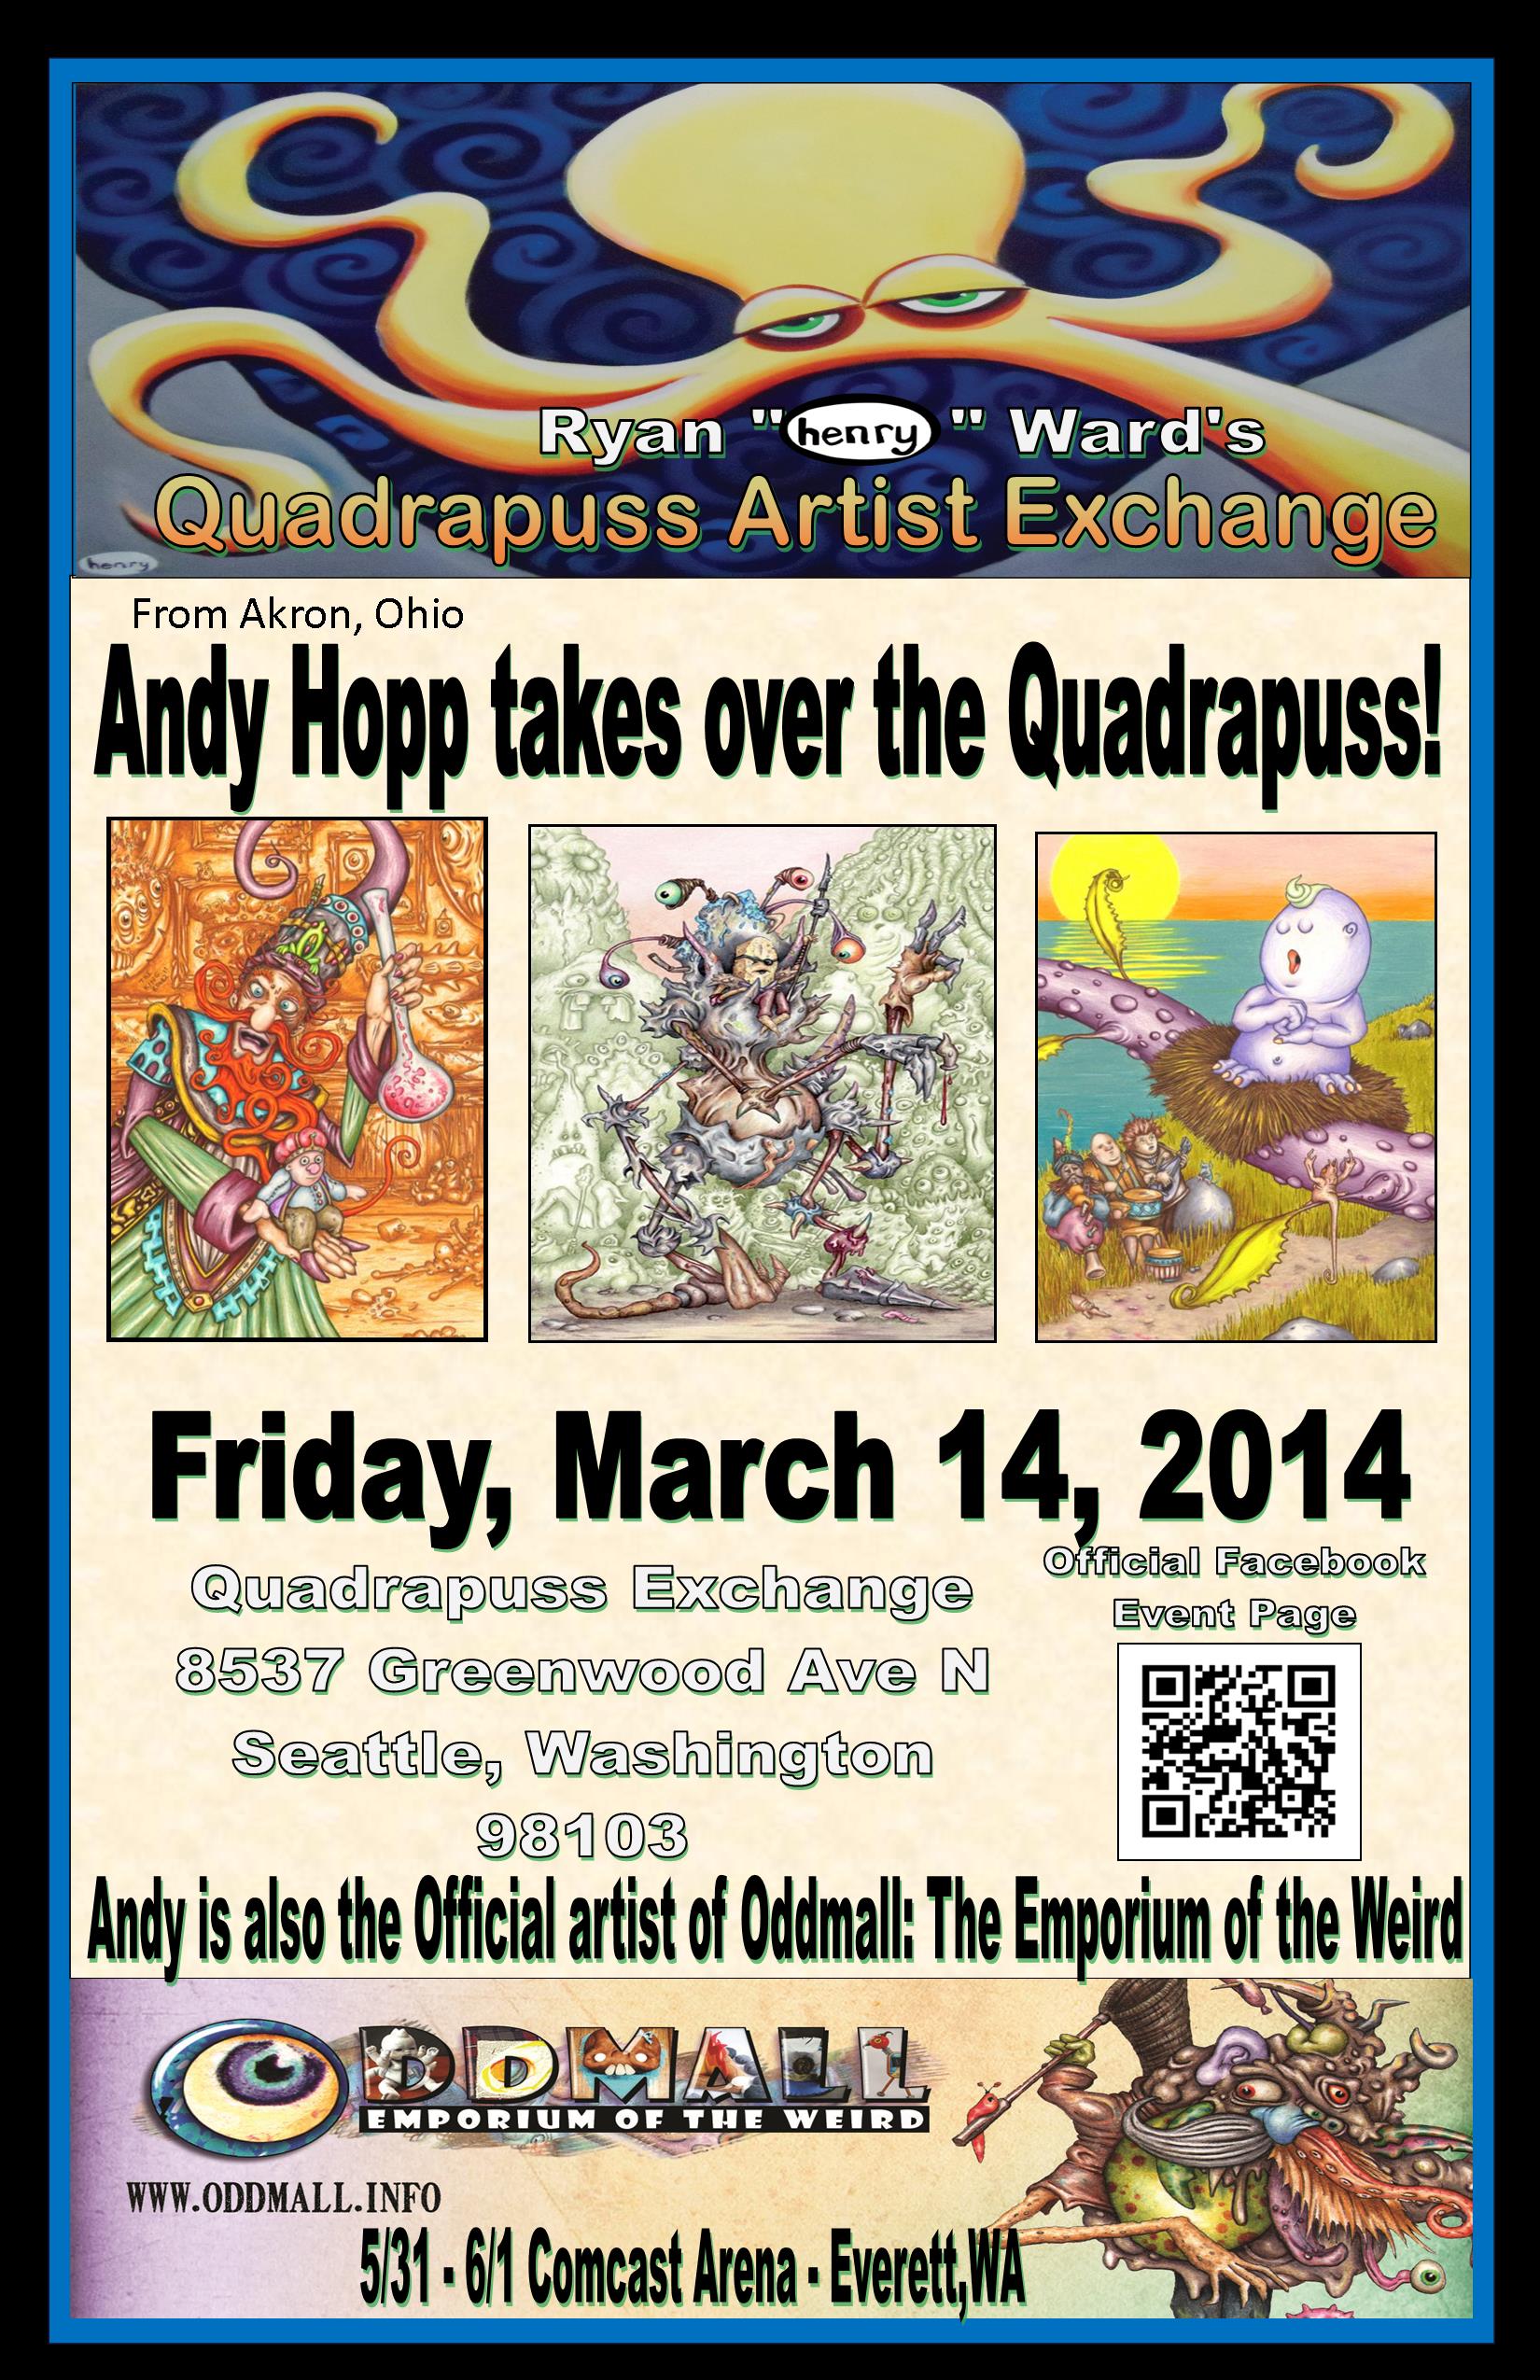 Andy Hopp is coming to town!